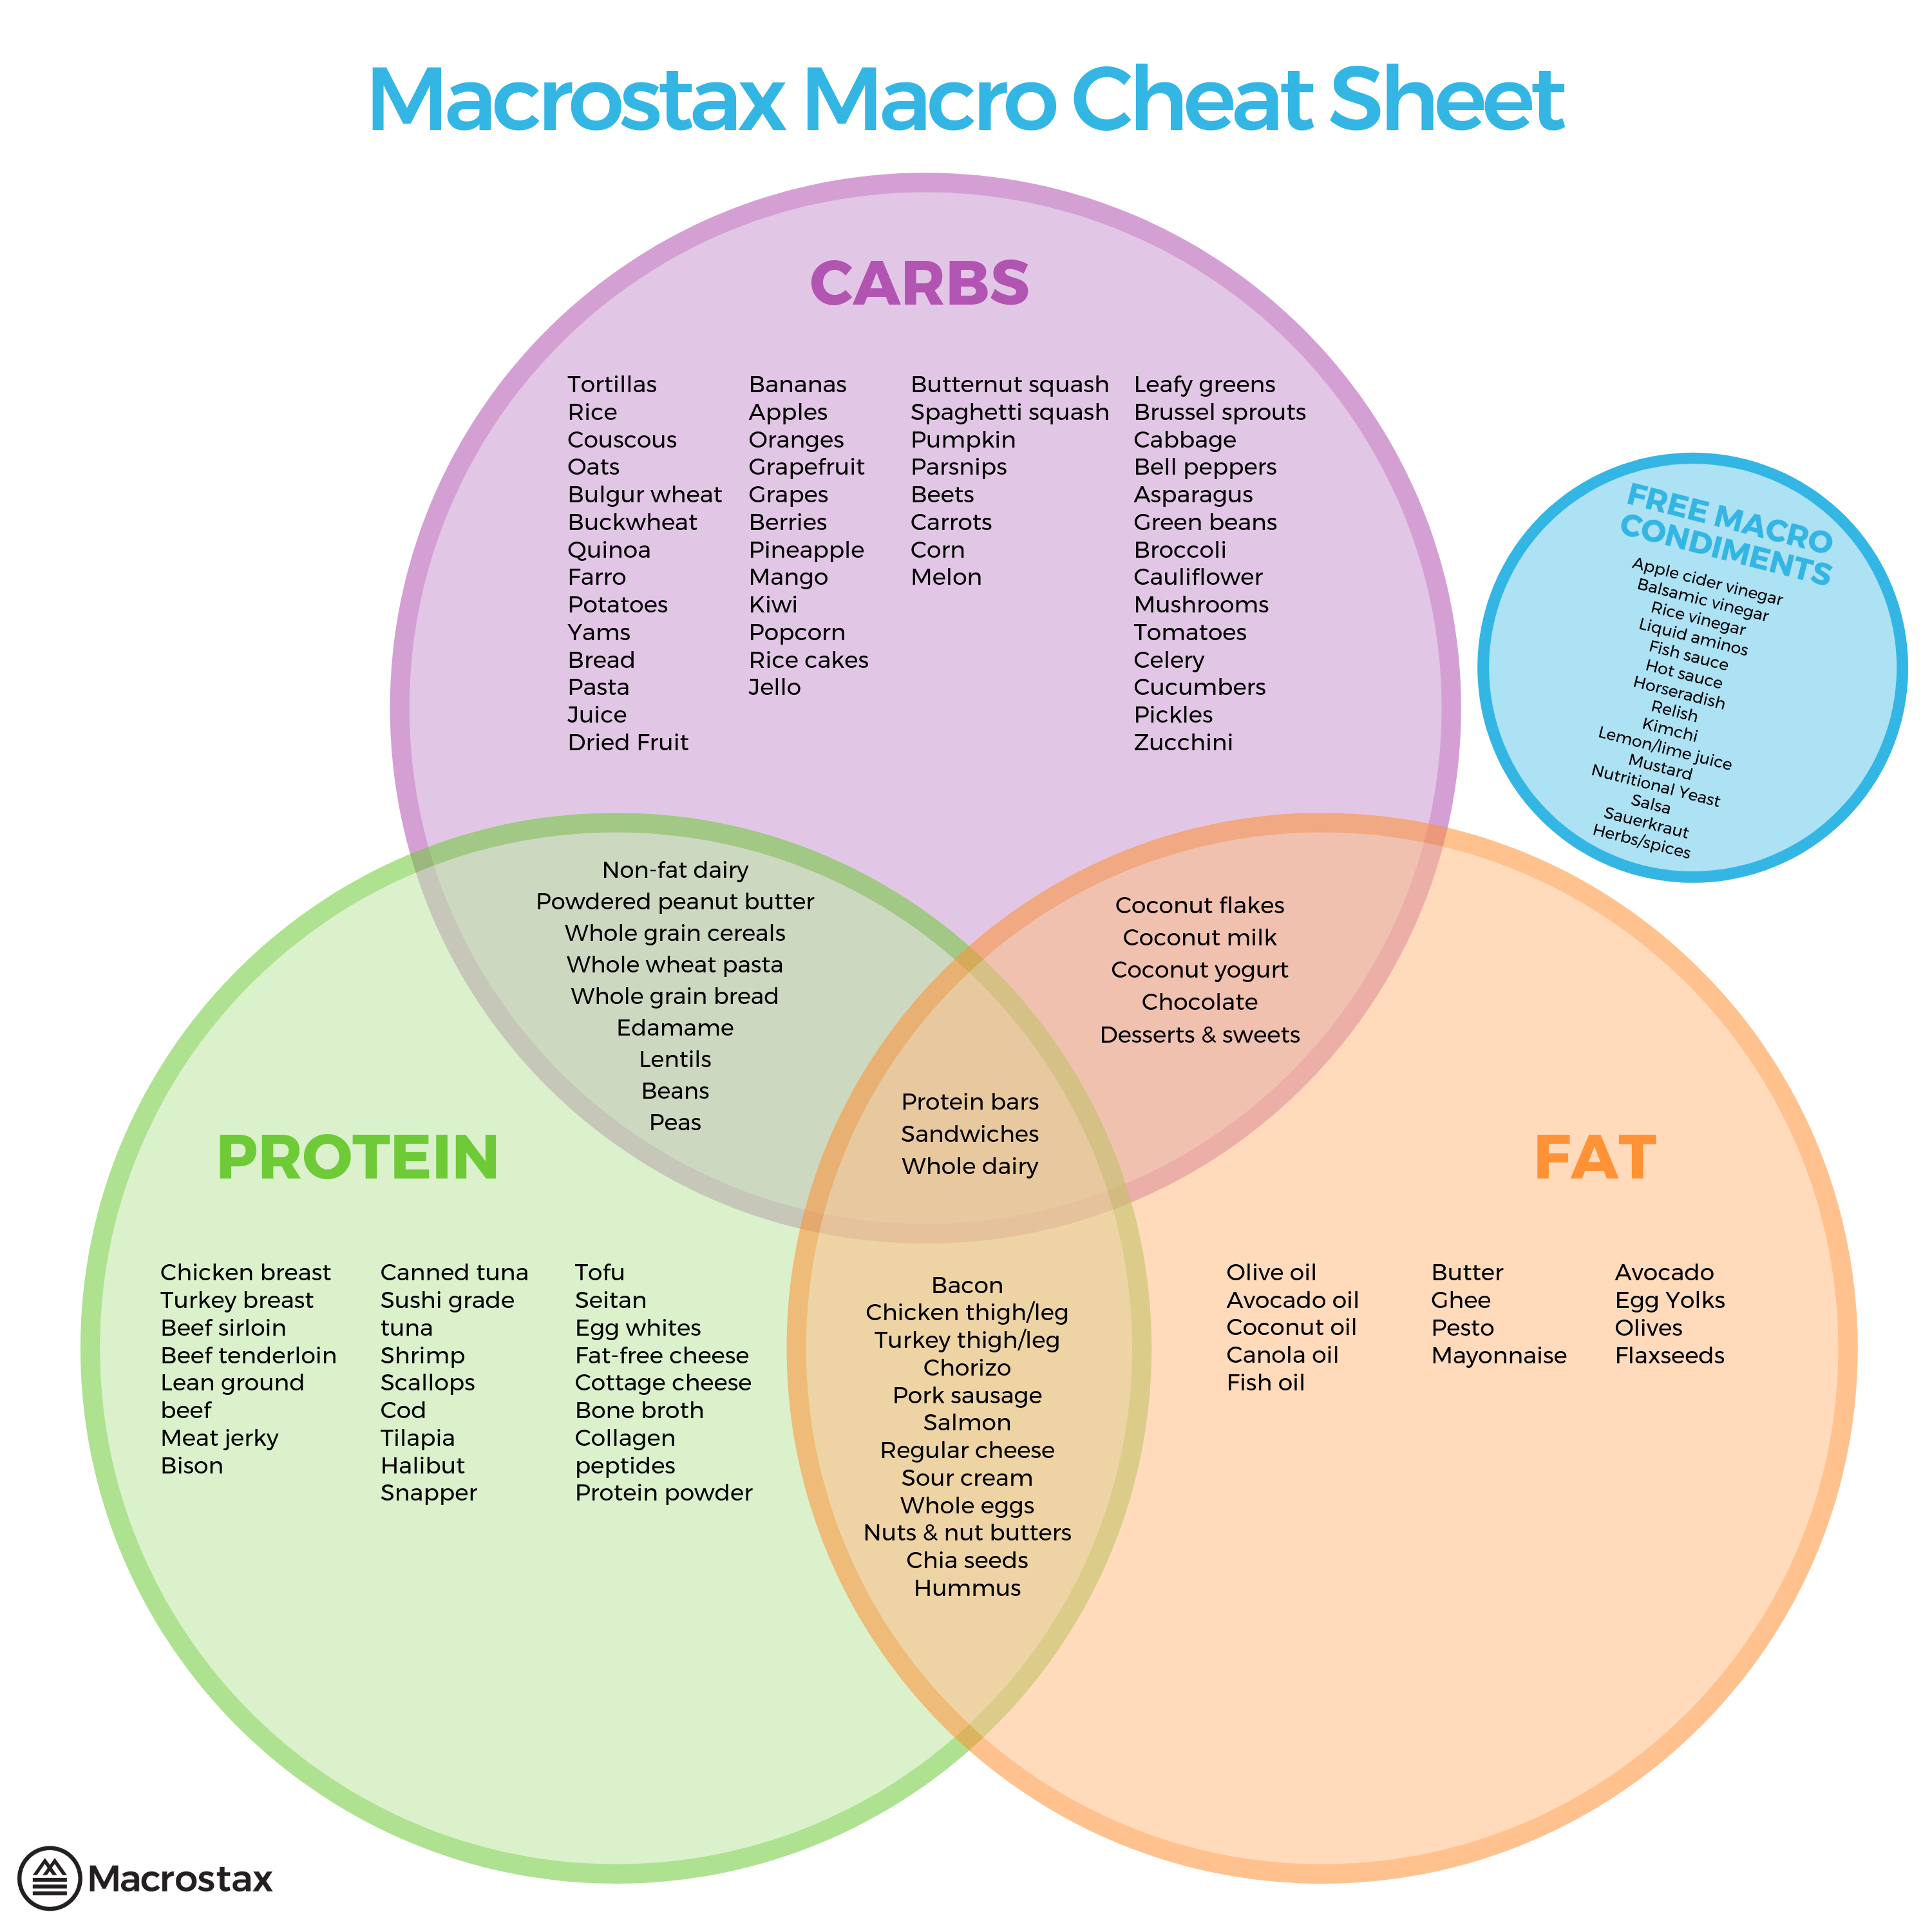 5-tips-to-help-you-hit-your-end-of-the-day-macros-macrostax